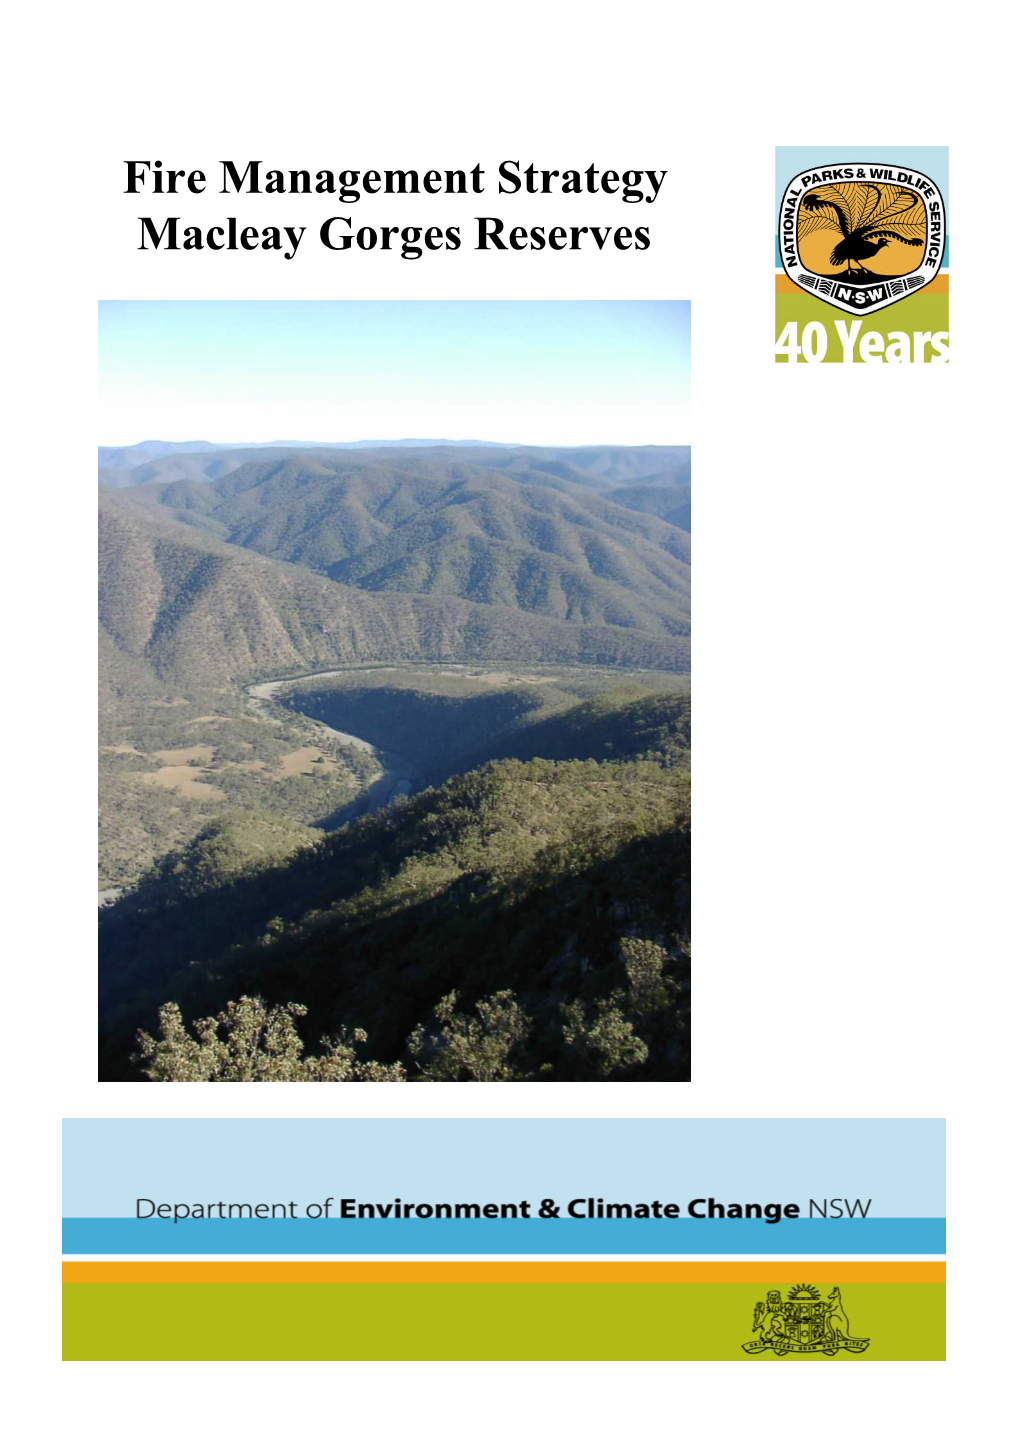 Macleay Gorges Reserves Fire Management Strategy